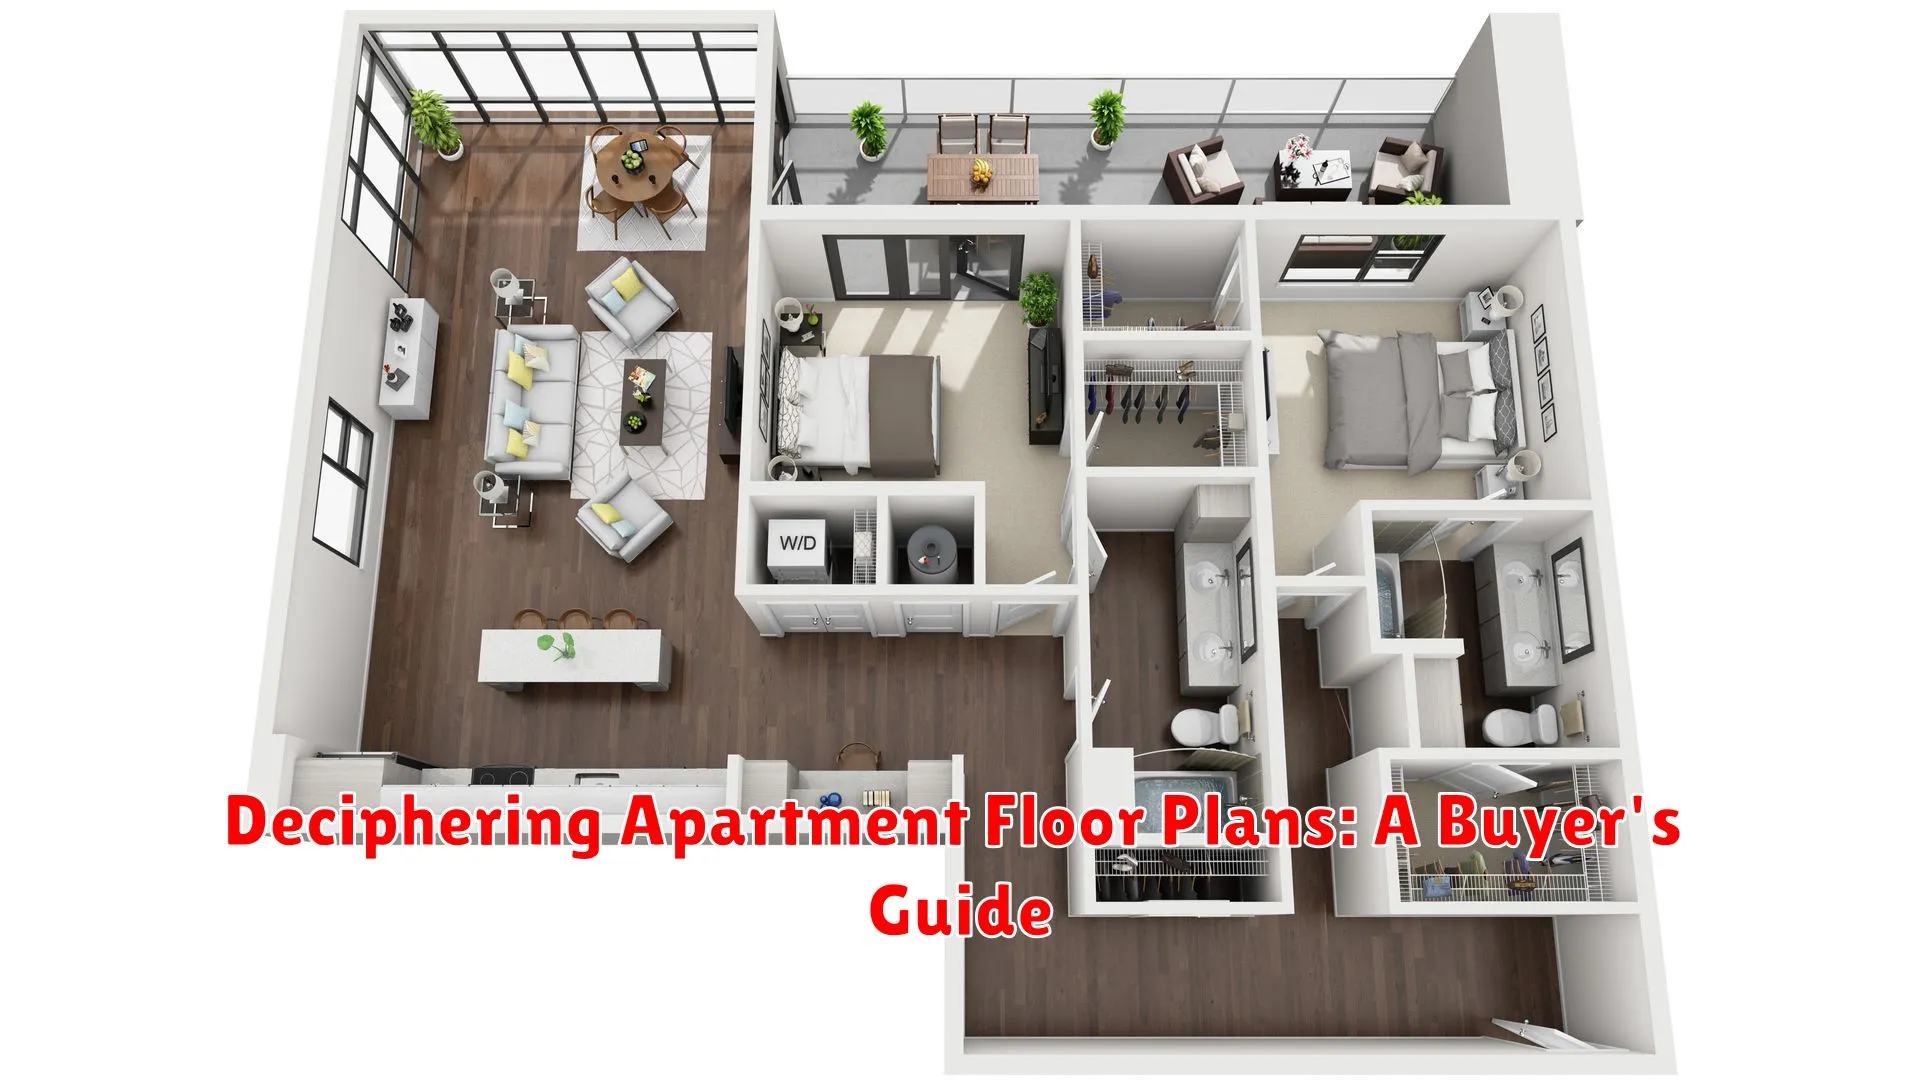 Deciphering Apartment Floor Plans: A Buyer's Guide